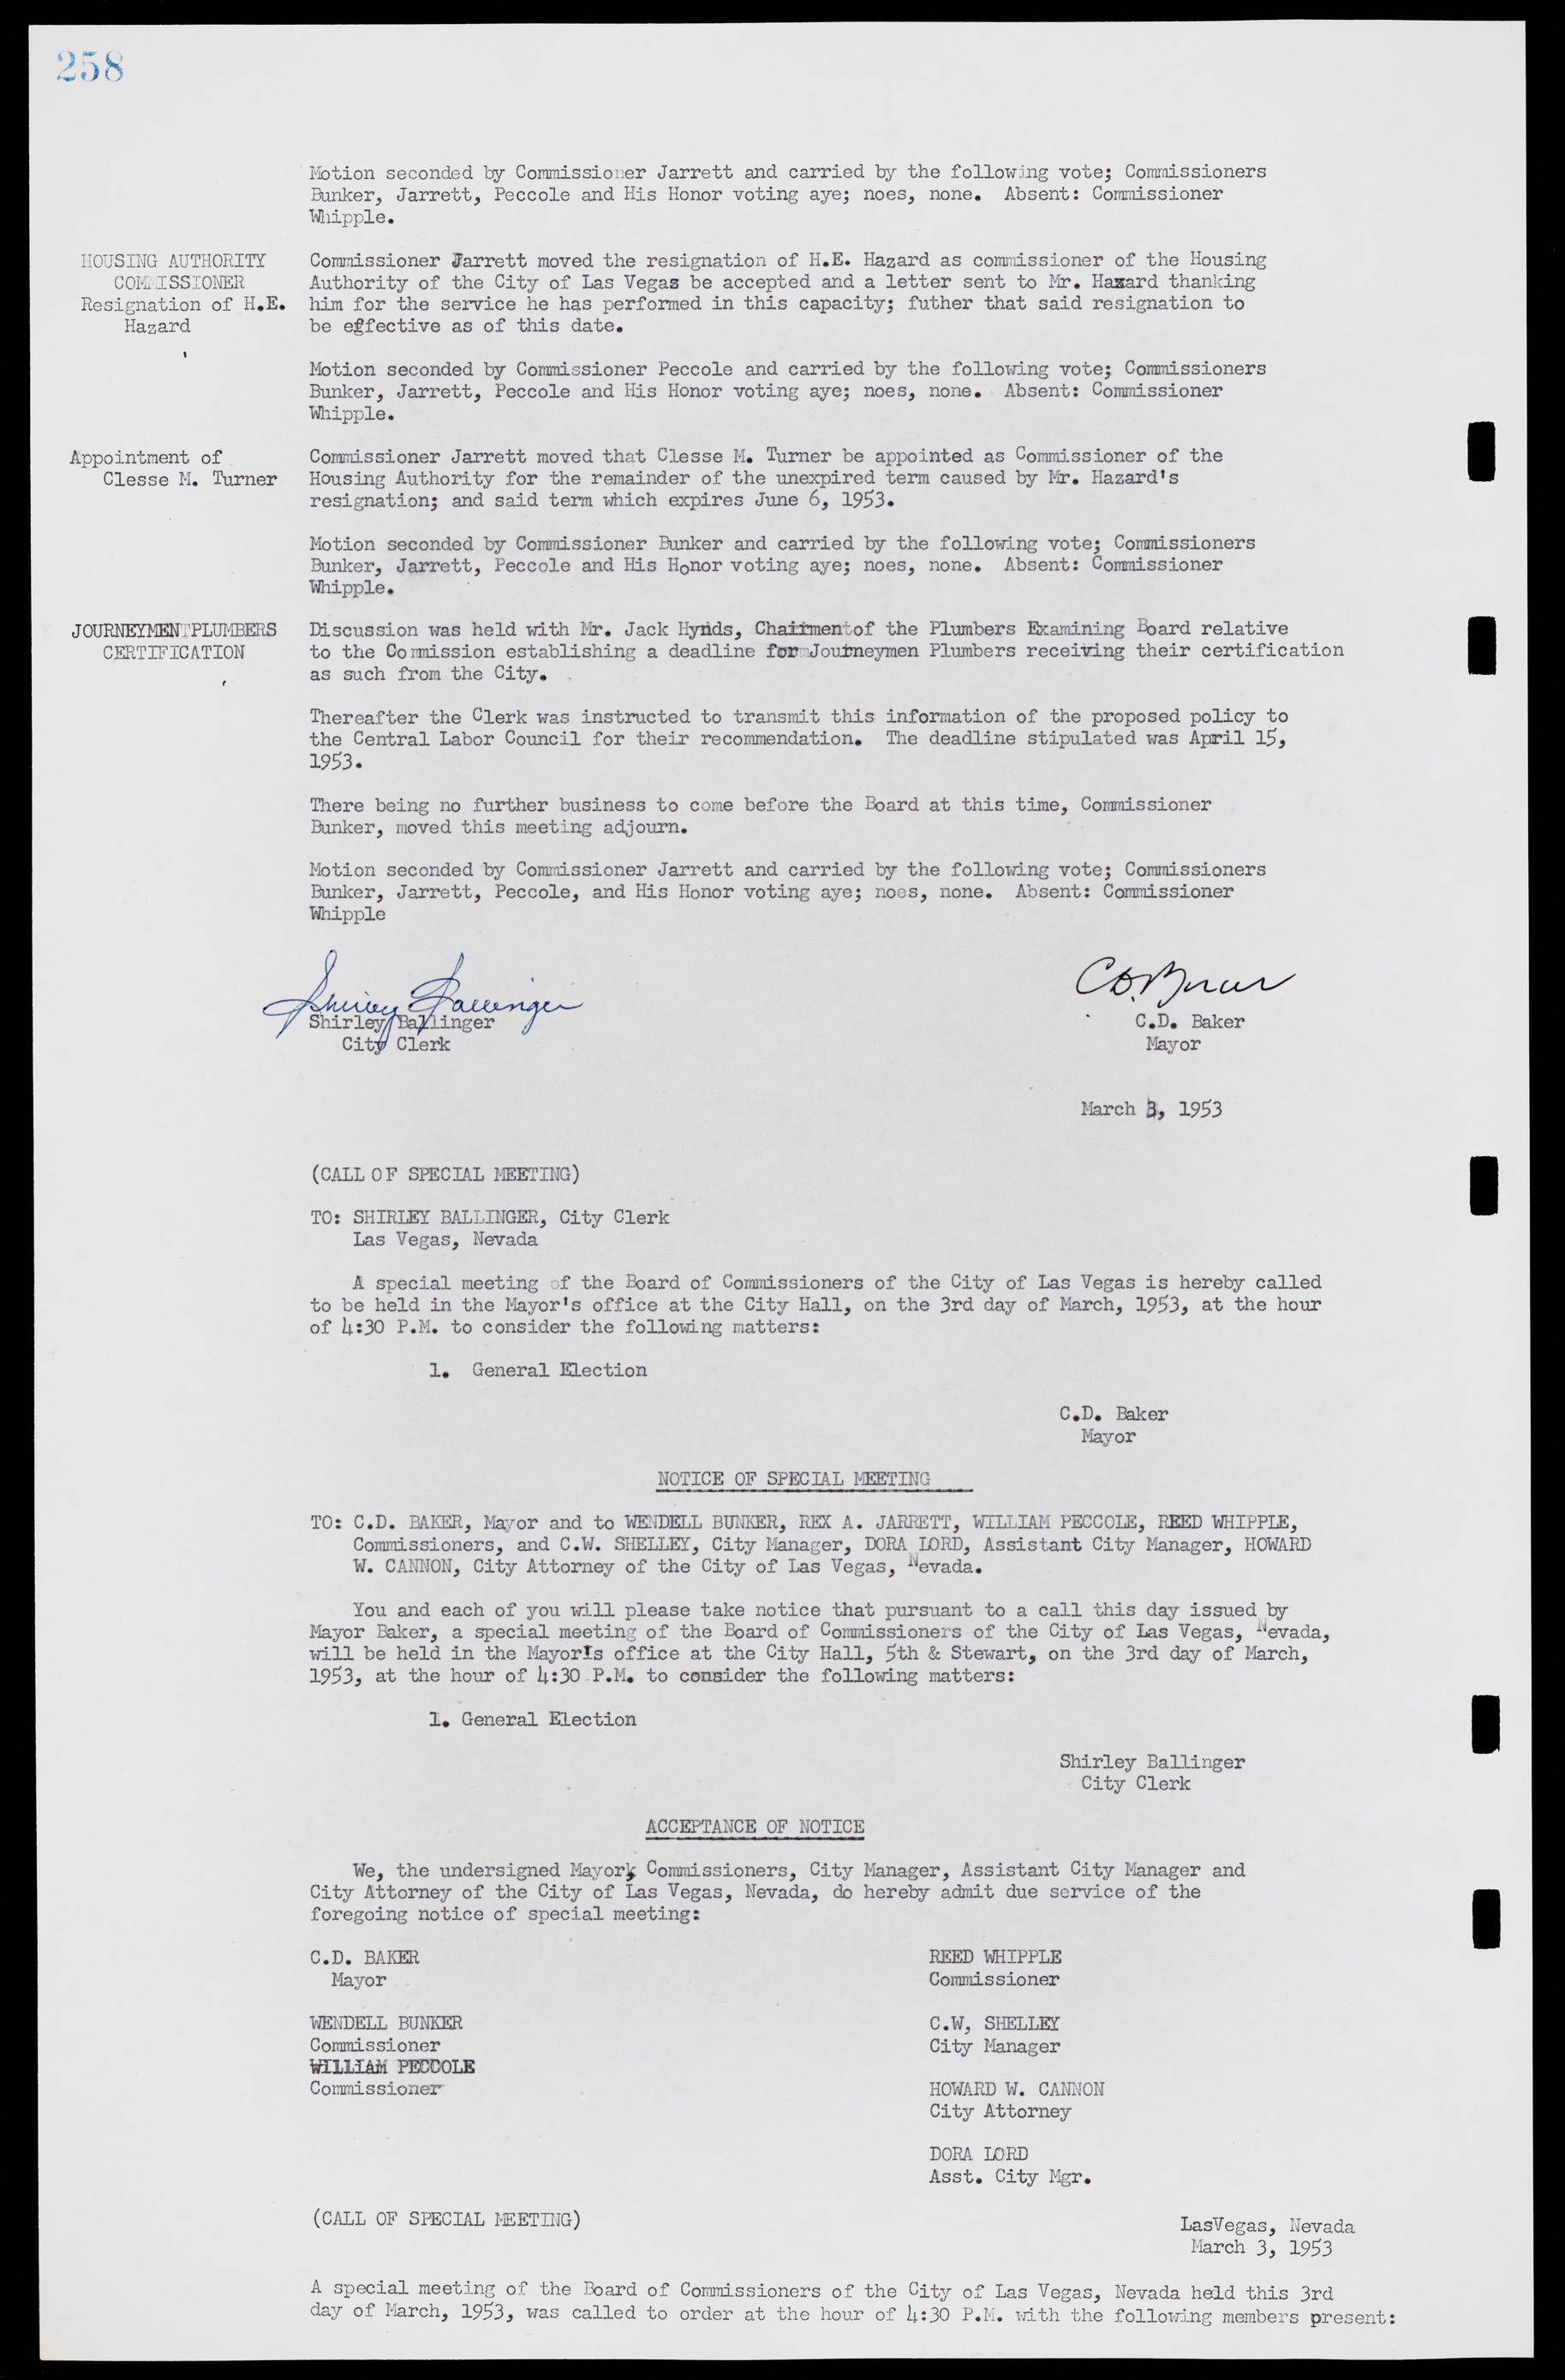 Las Vegas City Commission Minutes, May 26, 1952 to February 17, 1954, lvc000008-274